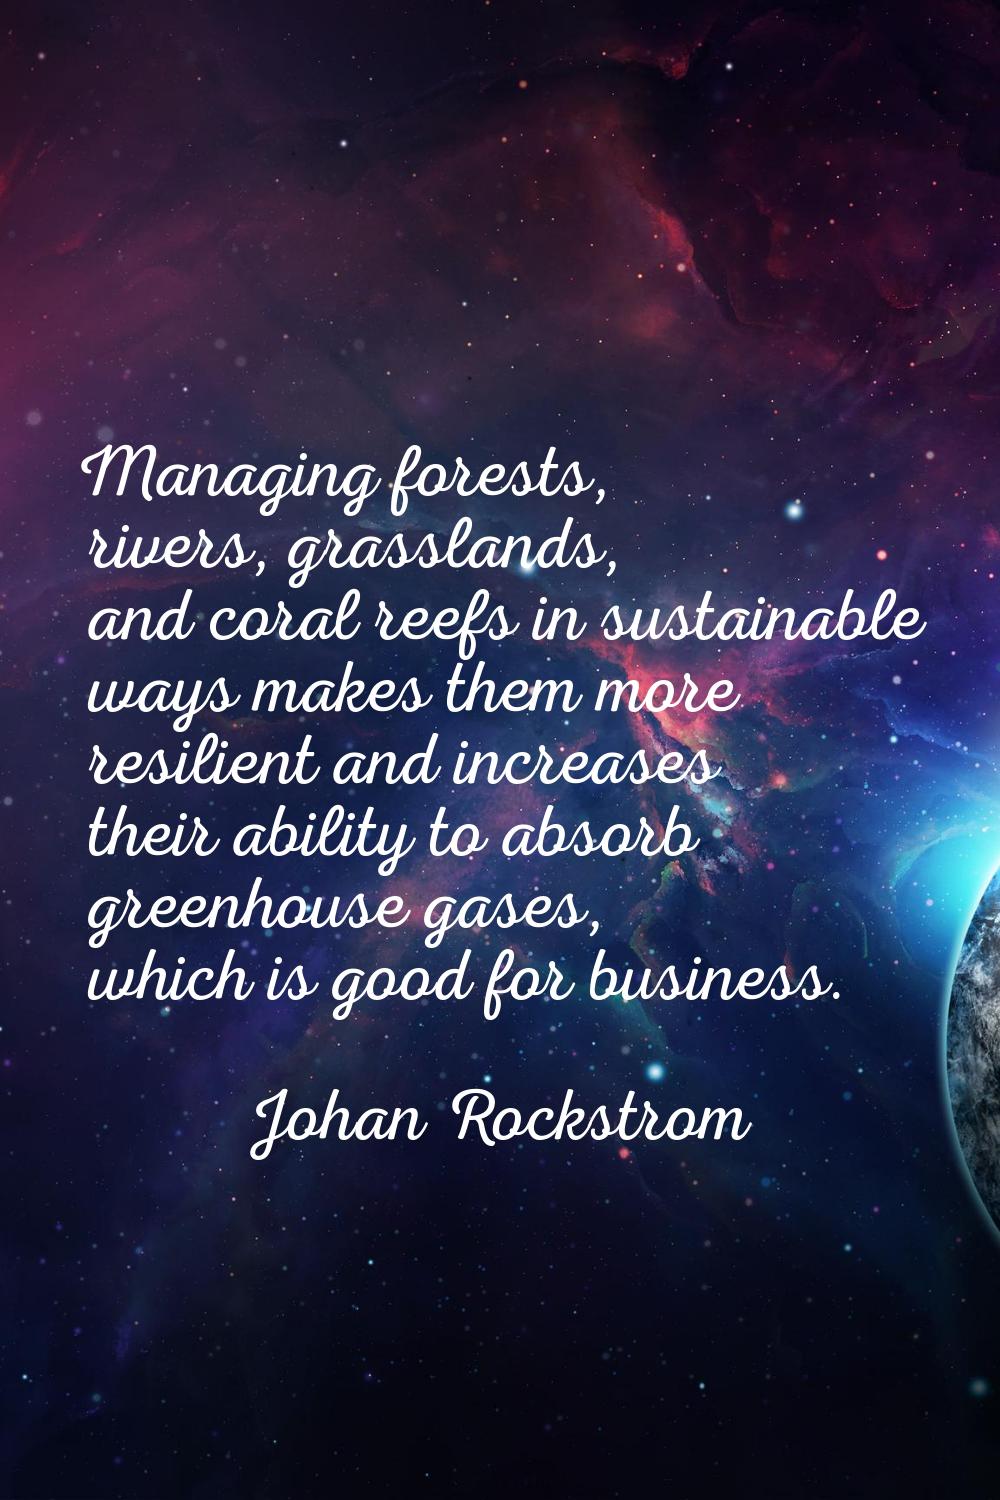 Managing forests, rivers, grasslands, and coral reefs in sustainable ways makes them more resilient